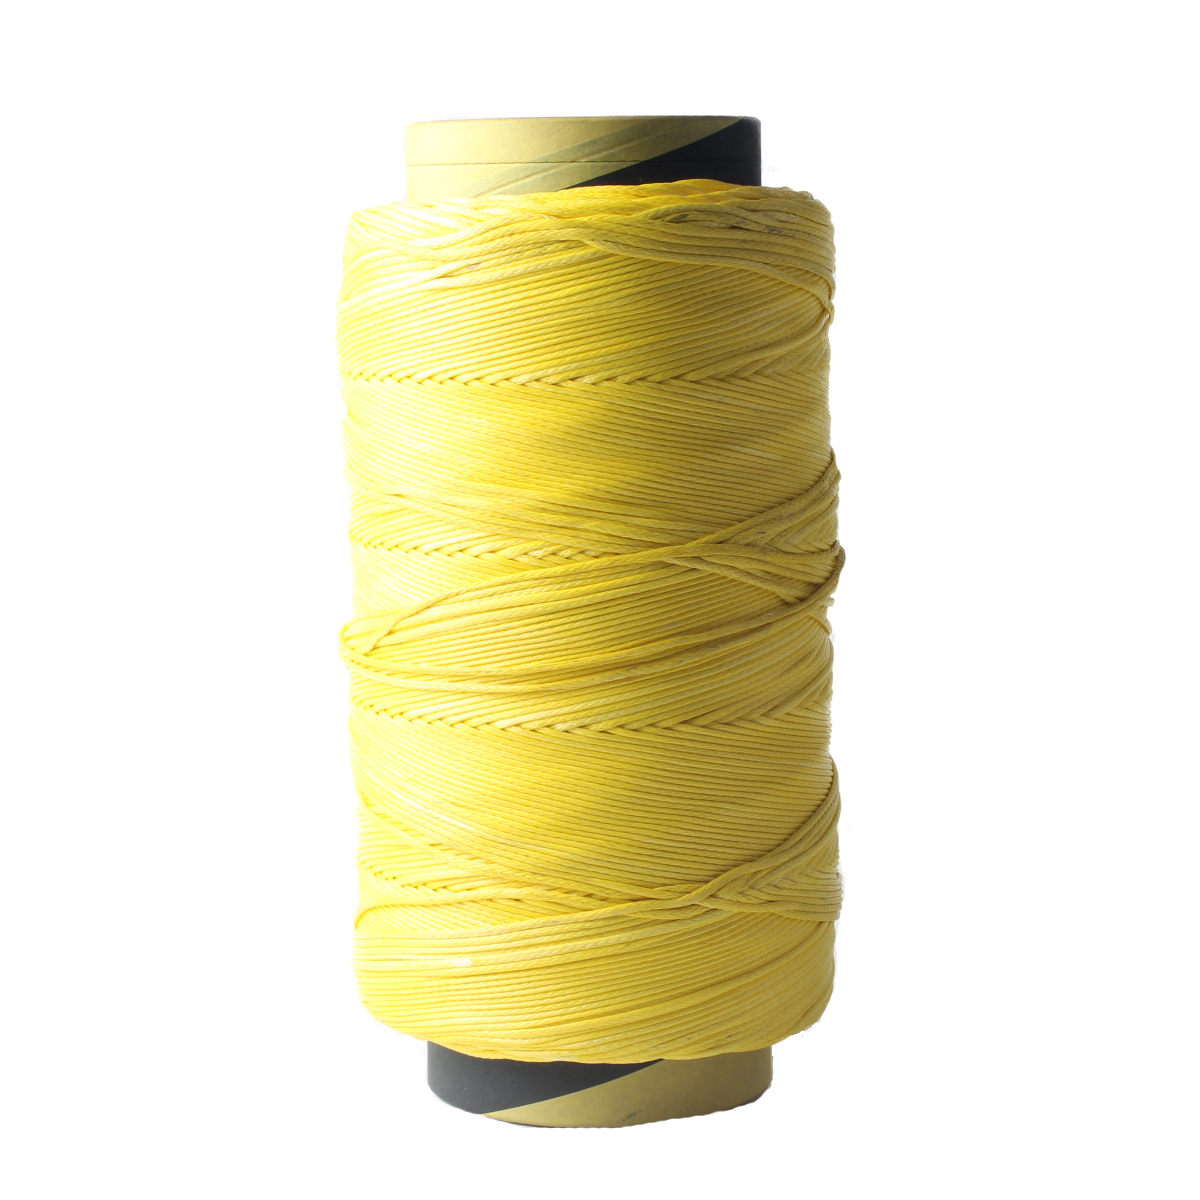 12strands braided vectran rope for paragliding winch